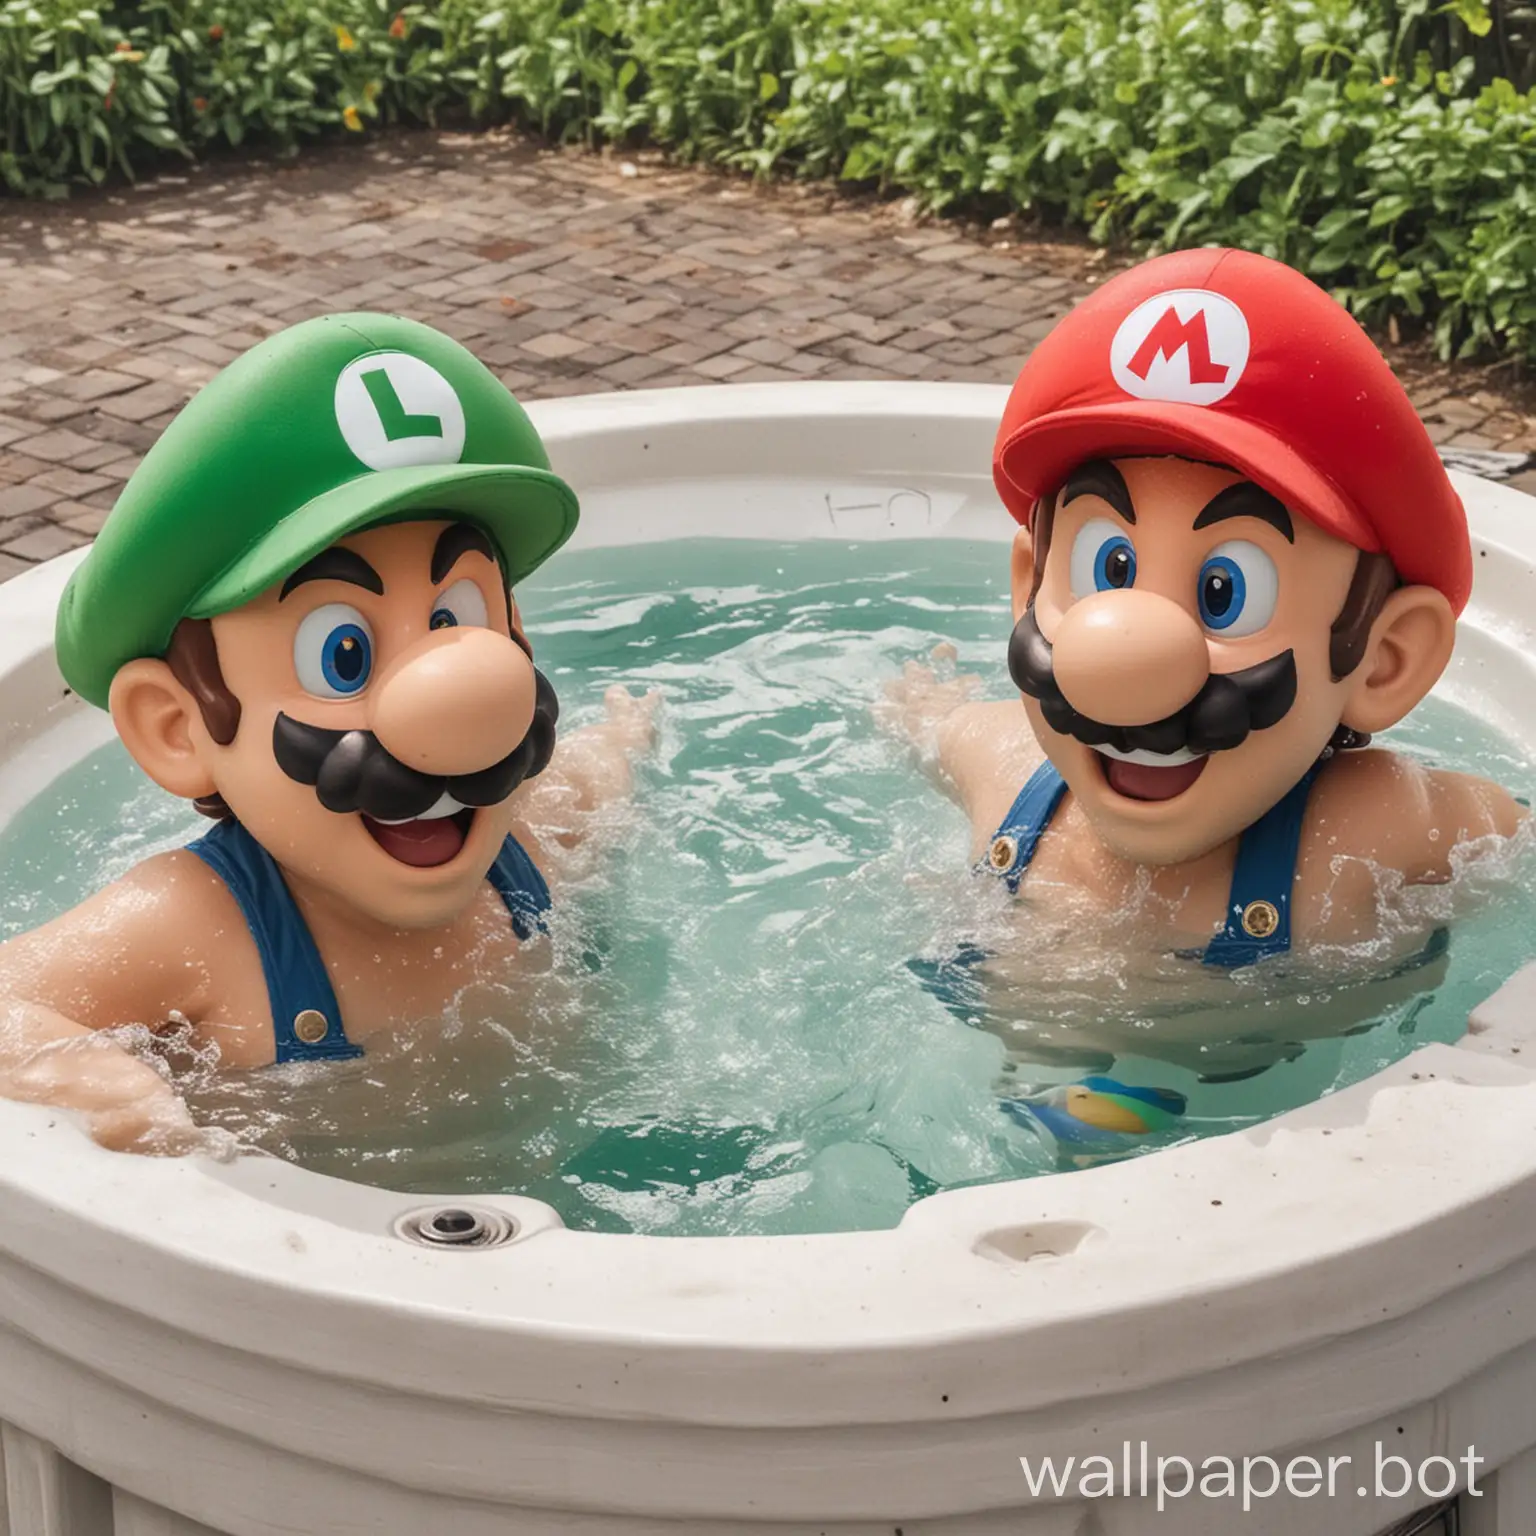 Mario and Luigi in a jacuzzi